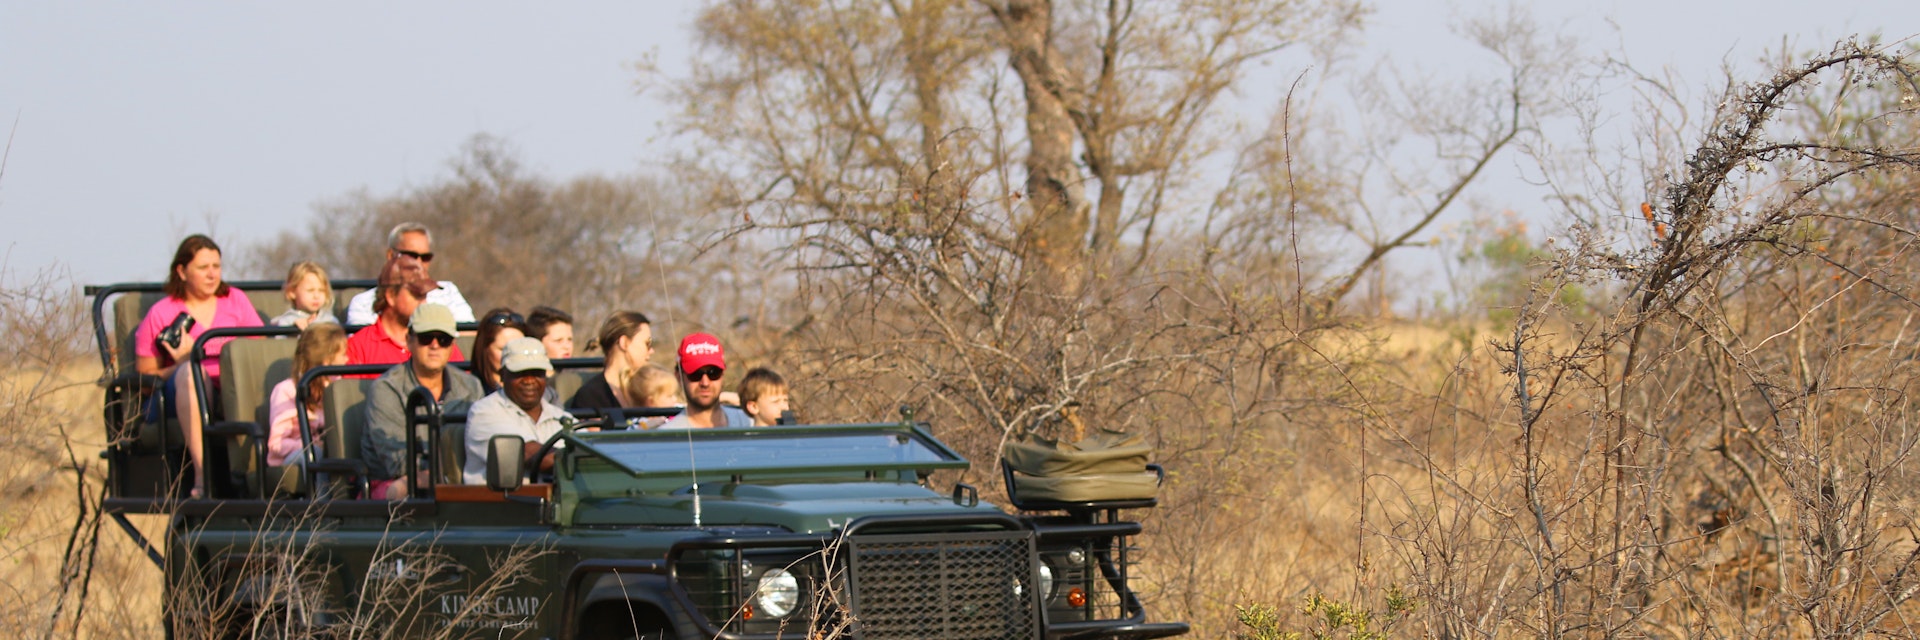 Tourists in a safari vehicle observing an African leopard in Timbavati Private Nature Reserve, South Africa.